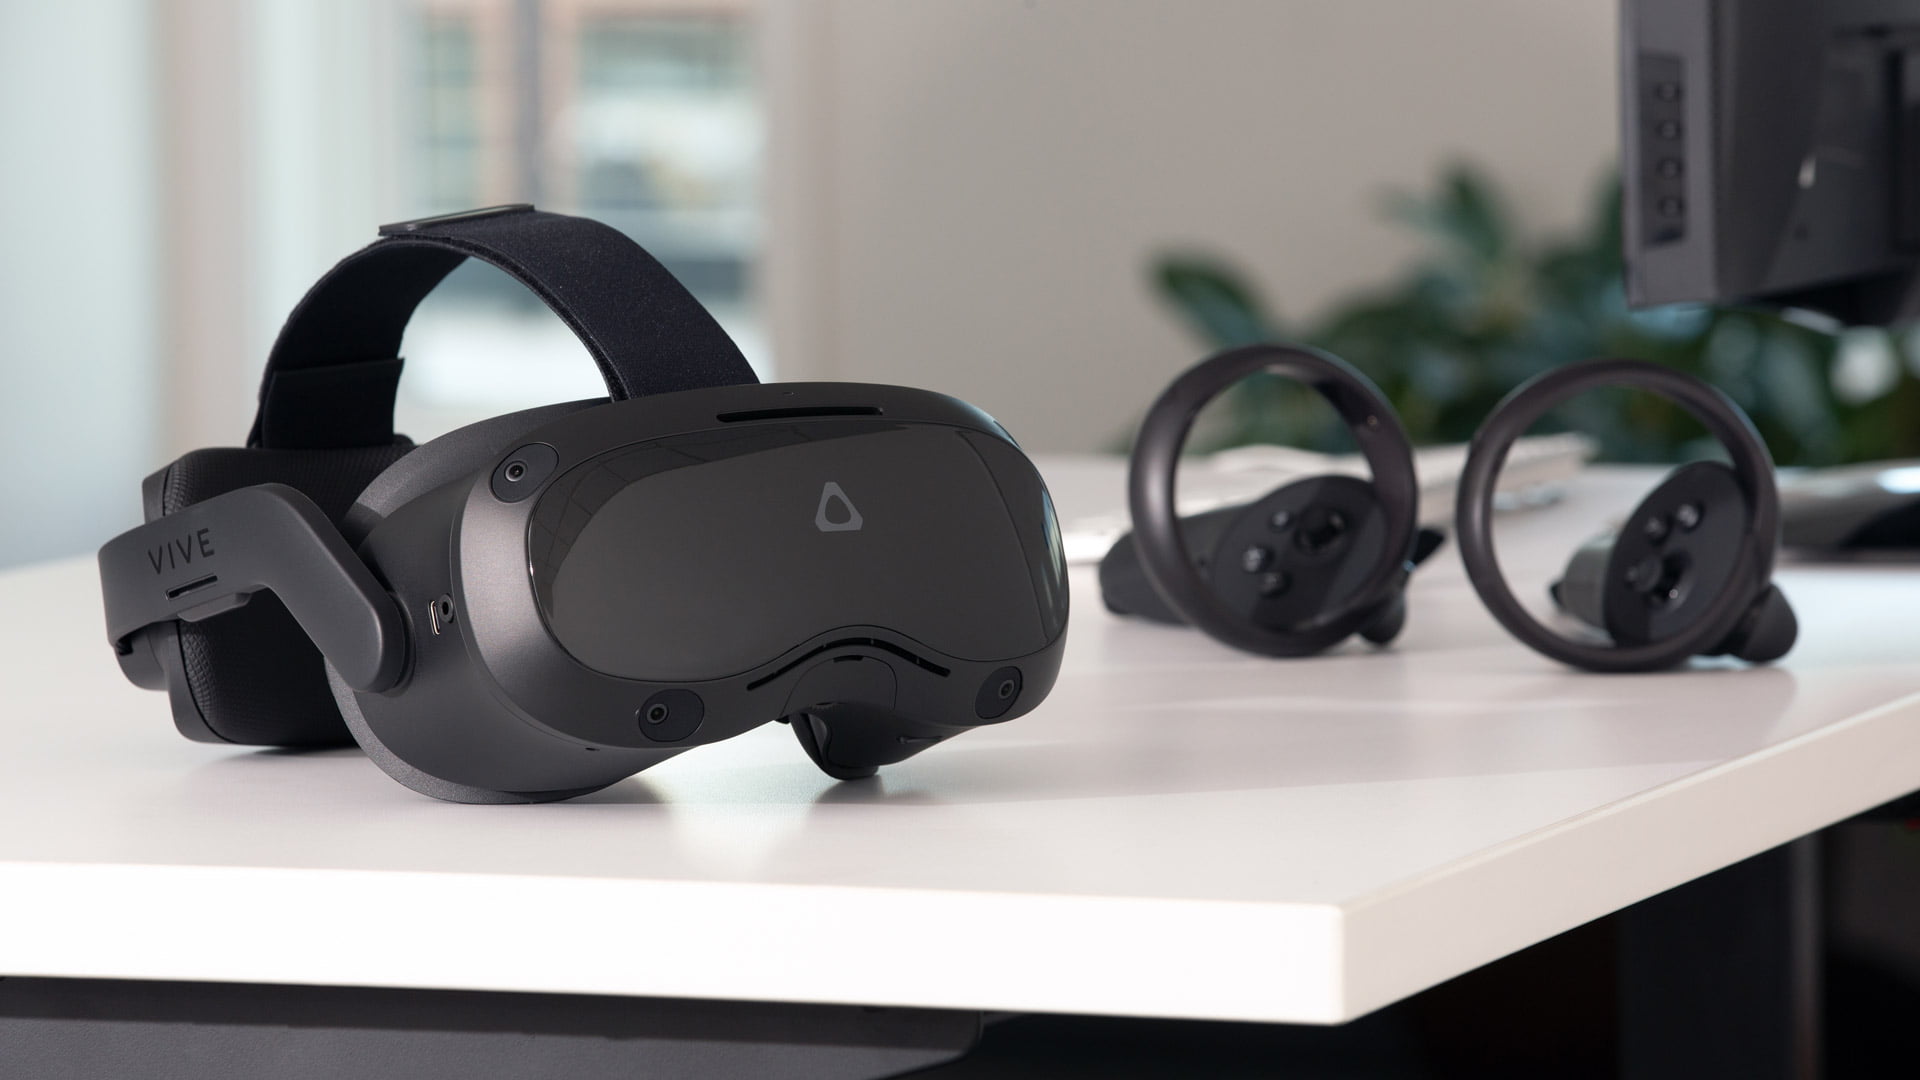 Vive Focus 3 is the first VR headset to support Microsoft Intune